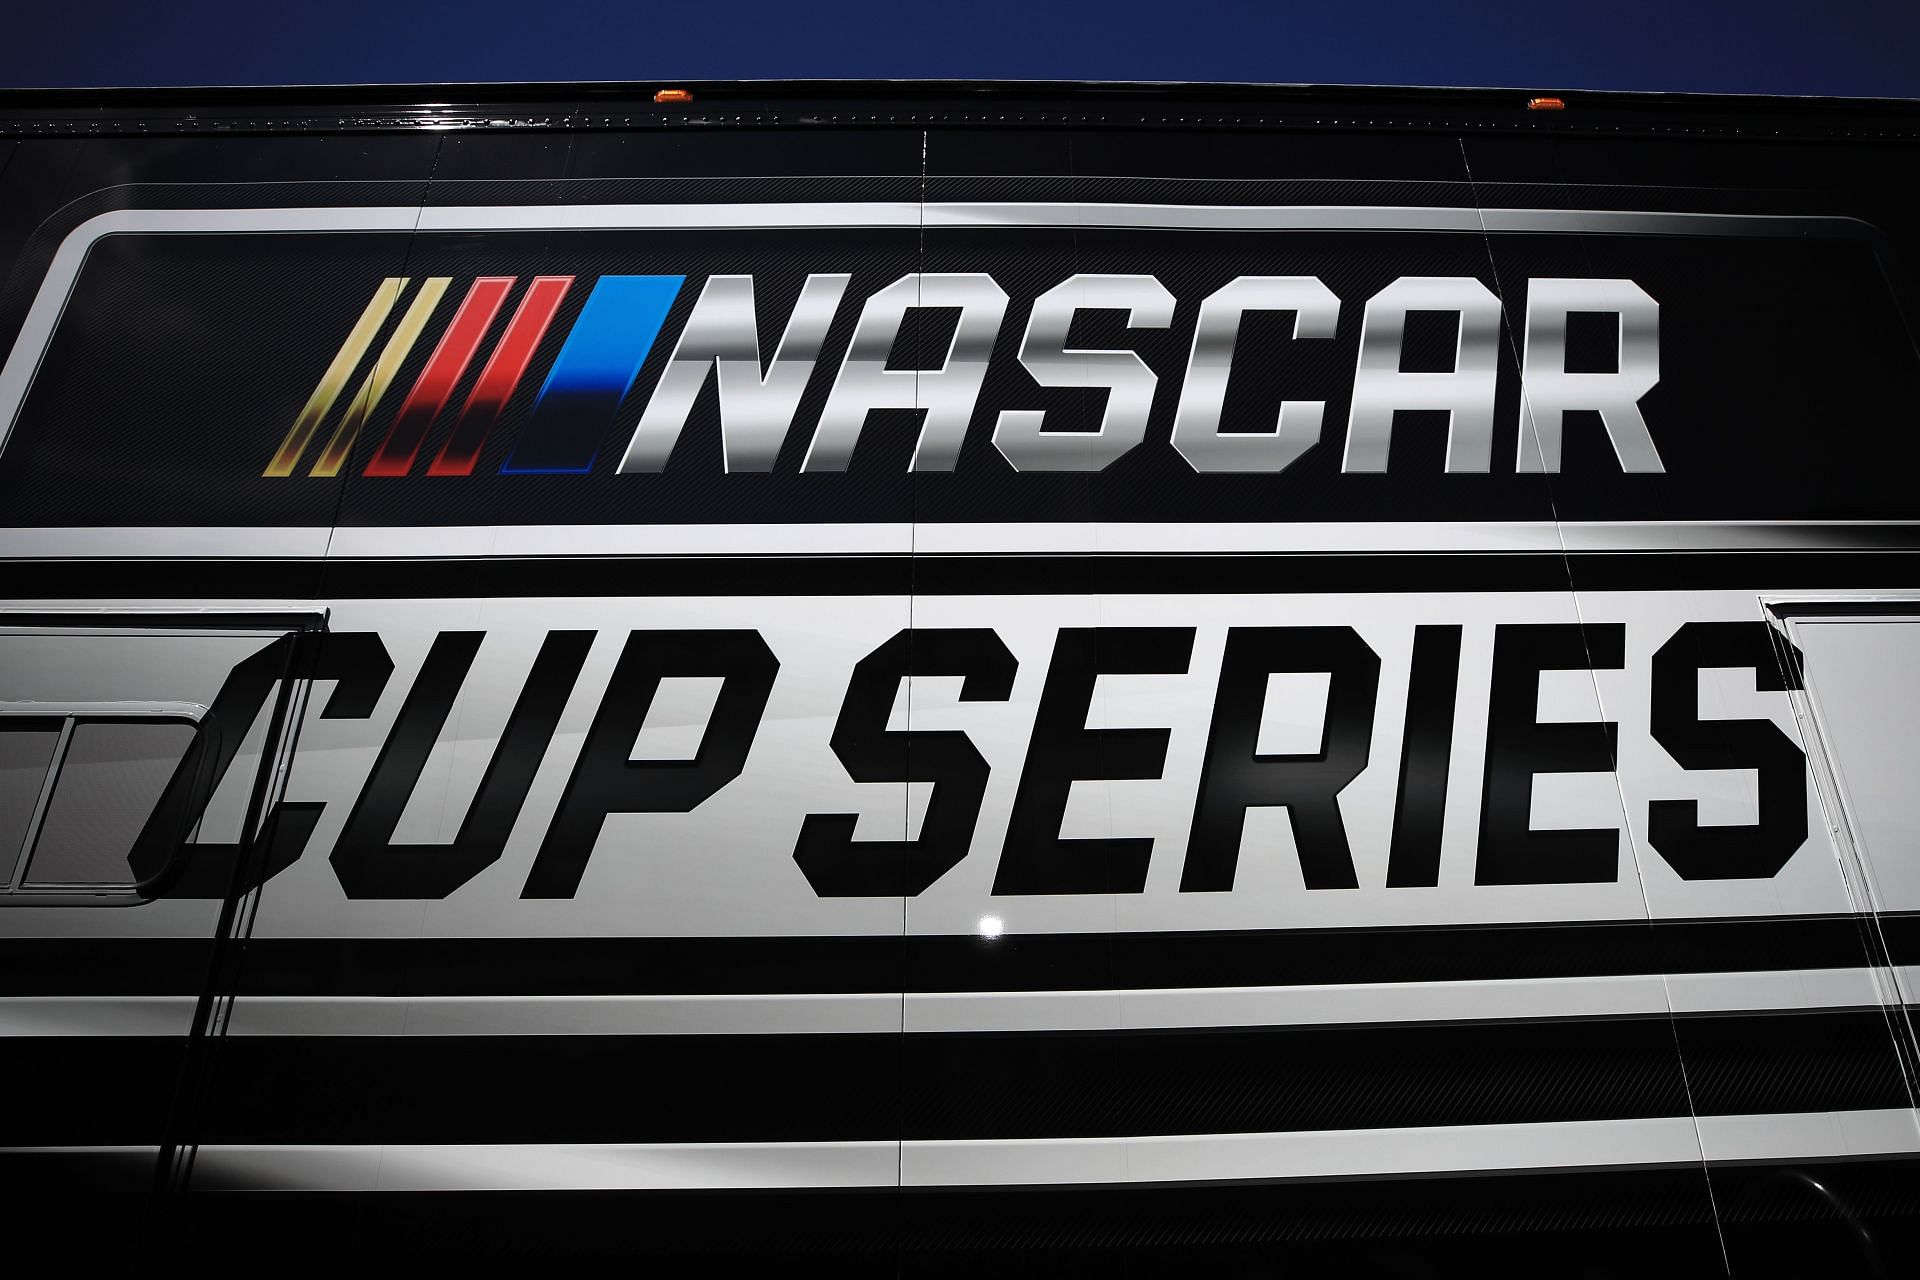 A general view of the Cup Series logo during practice for the Cup Series FanShield 500 at Phoenix Raceway